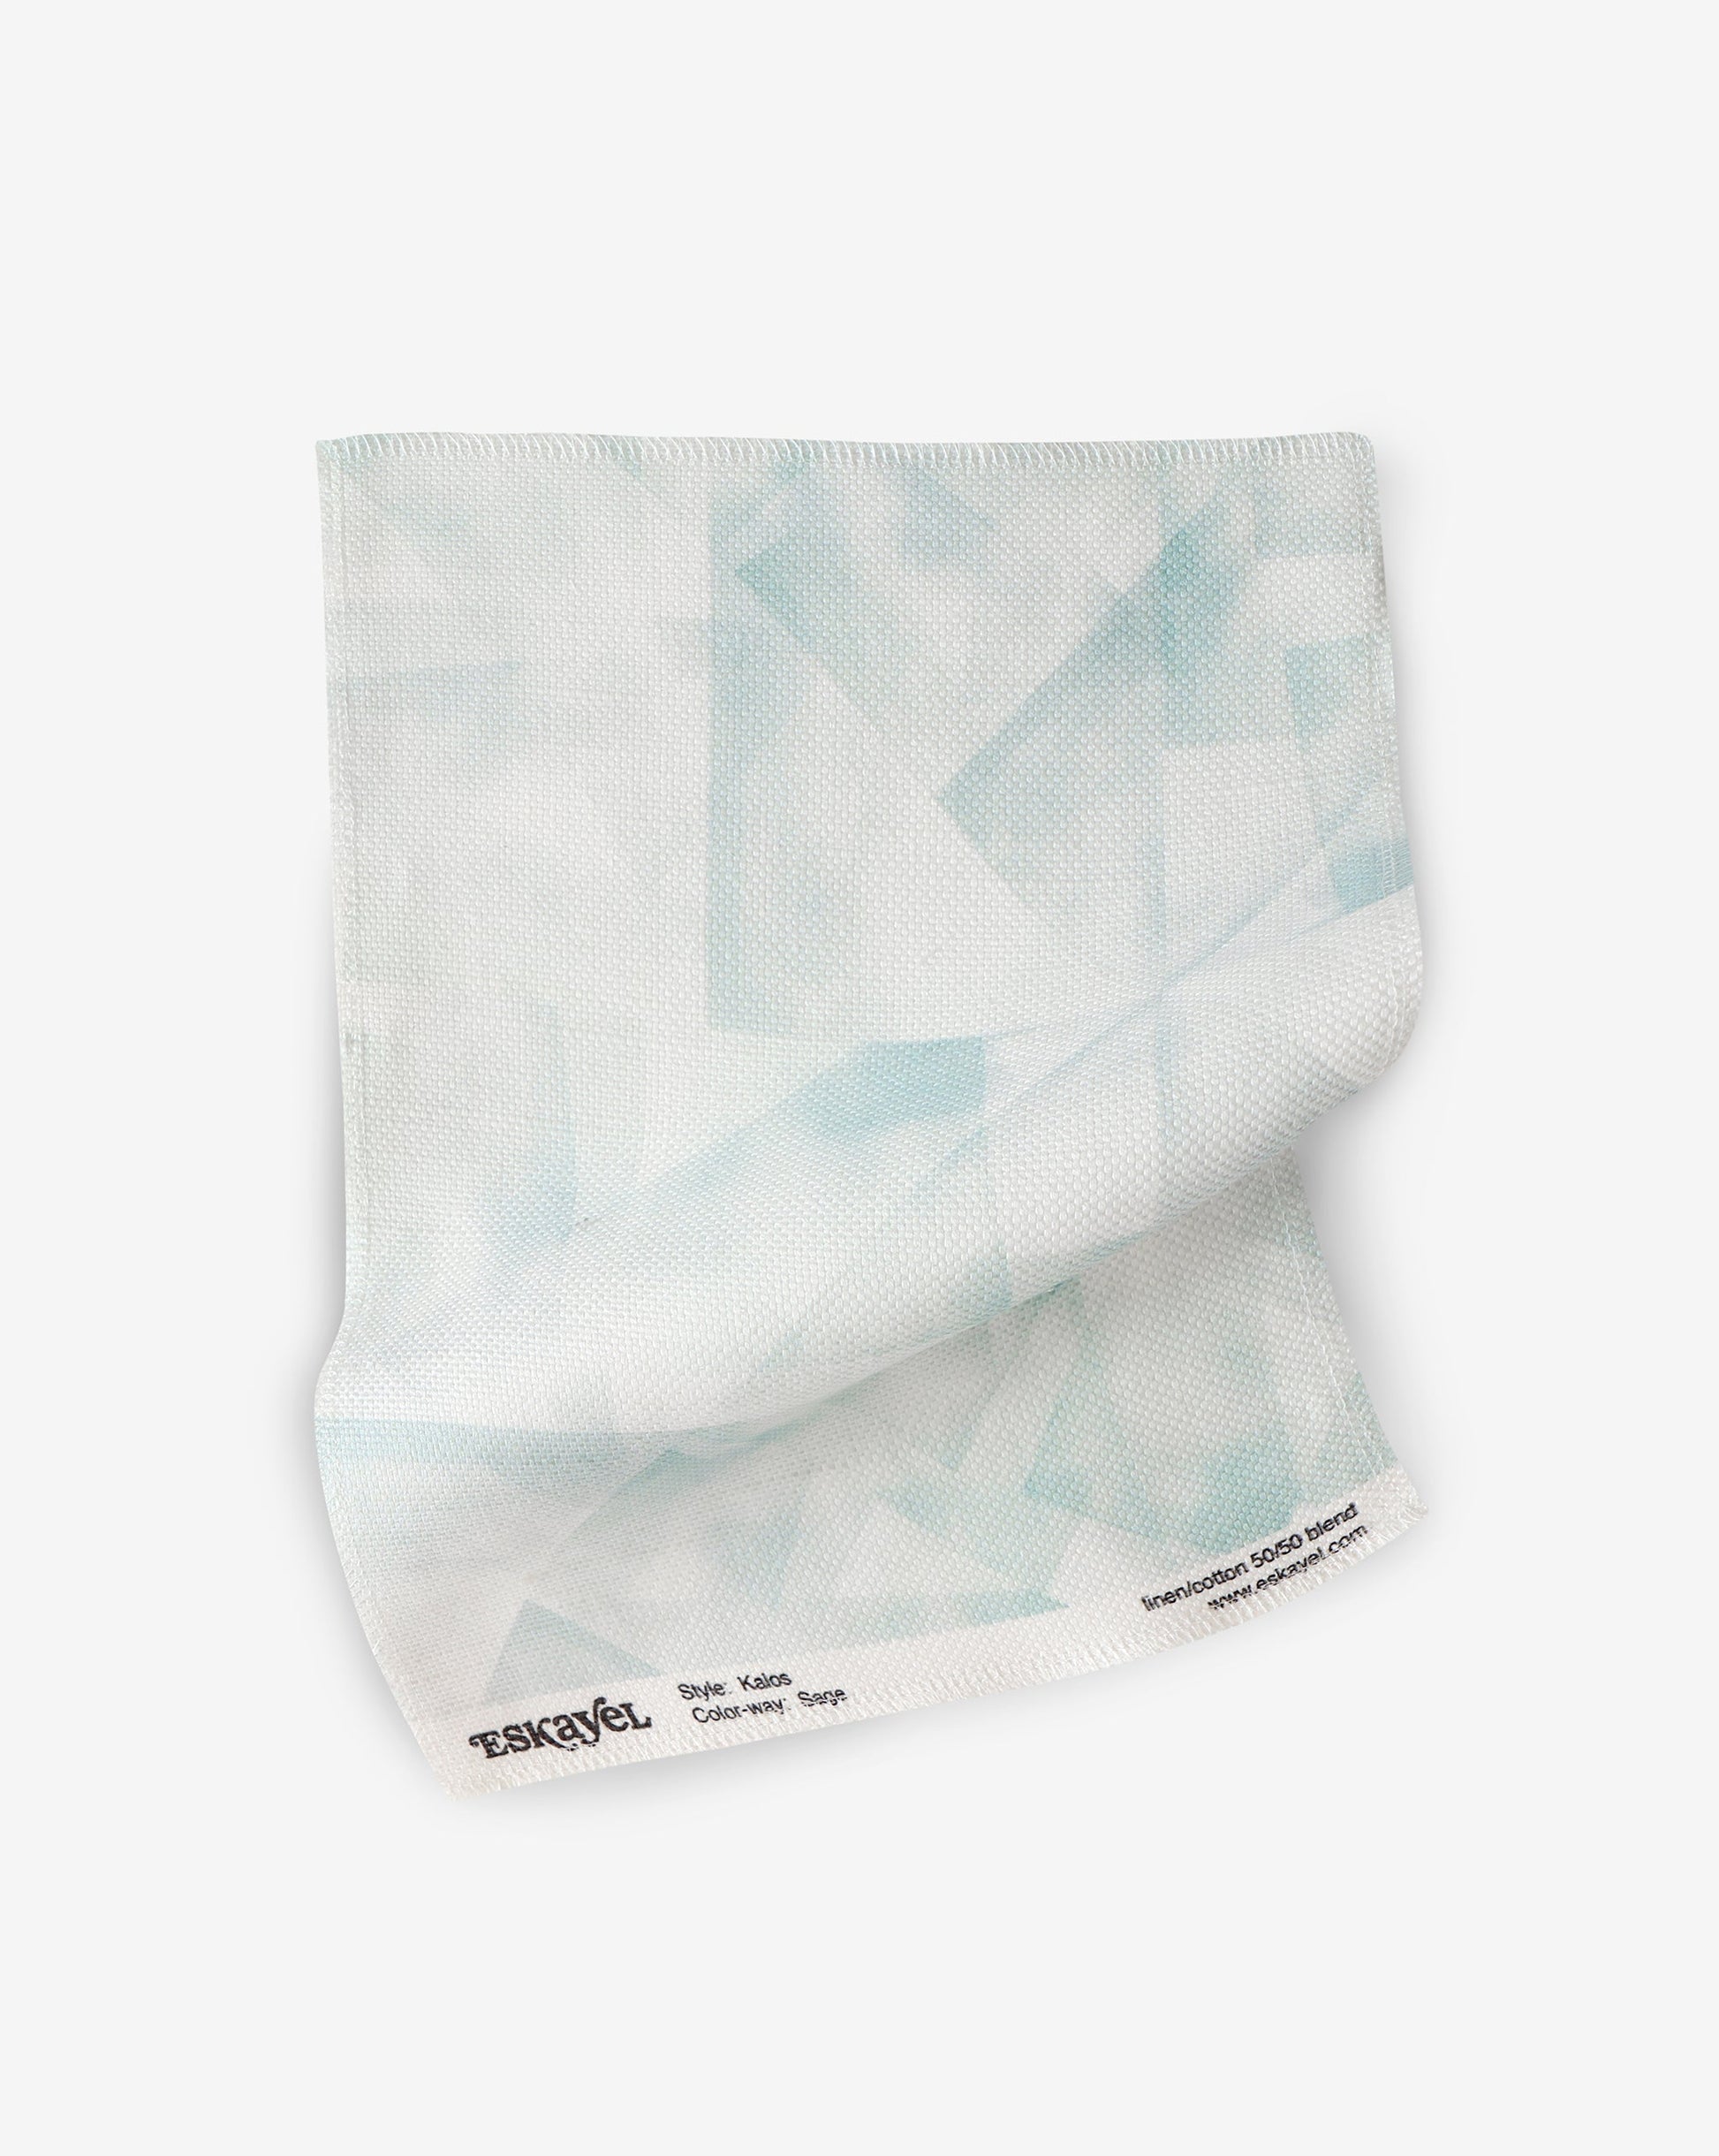 A white Alternate Fabric Ground Samples||Assorted with blue triangles patterns on it.